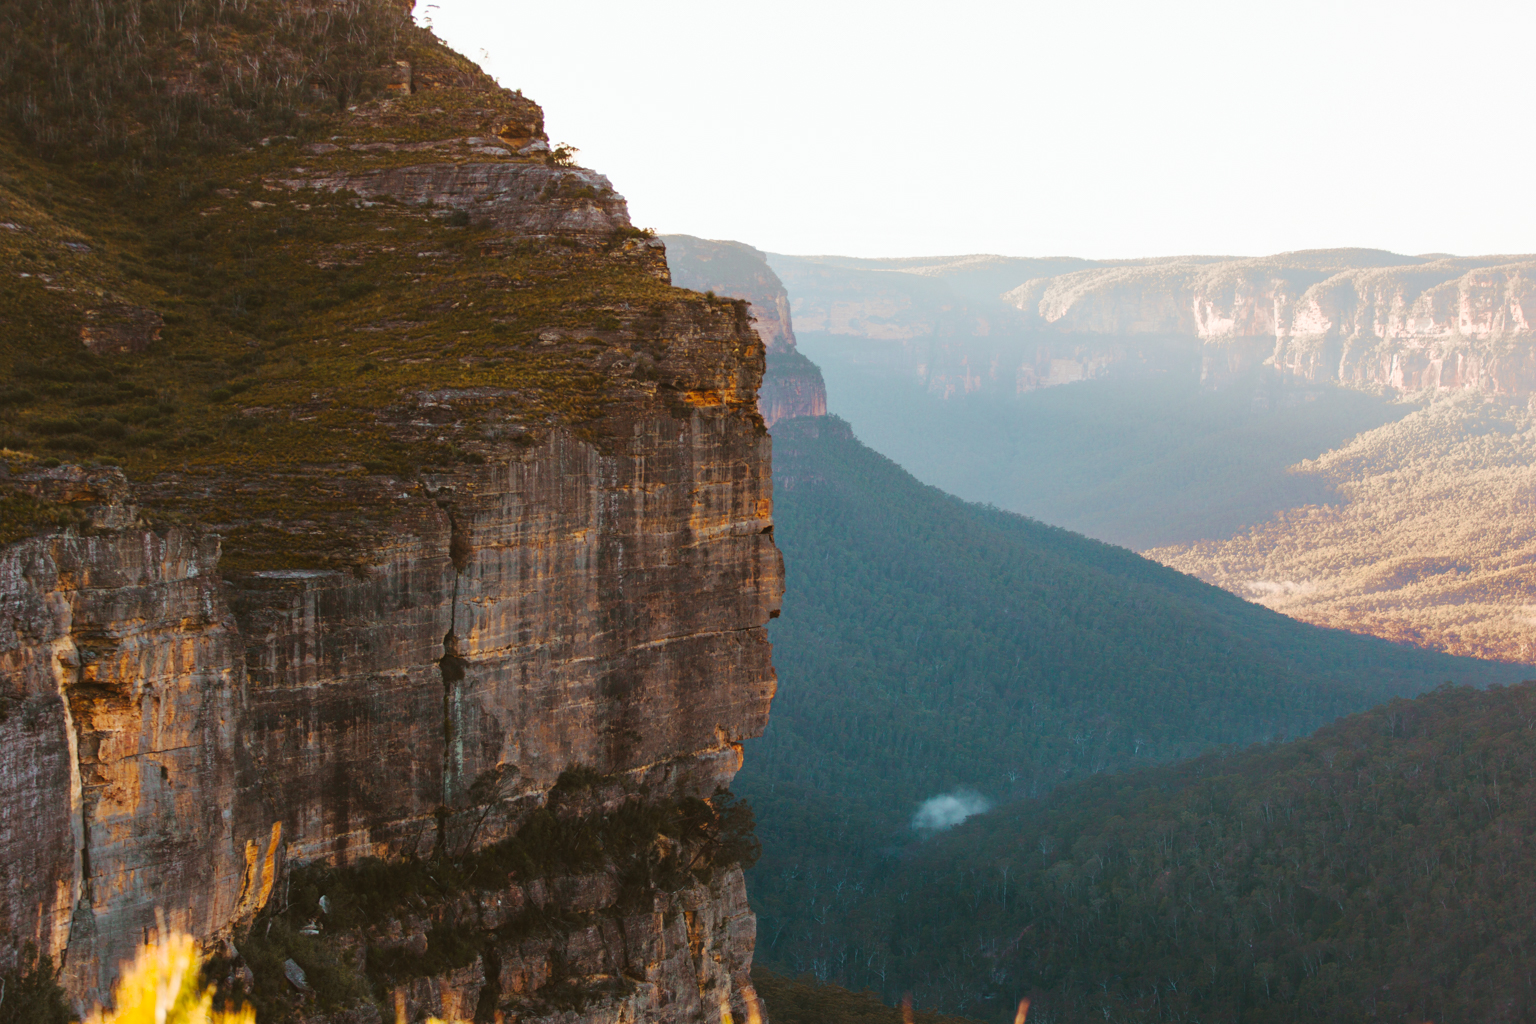 View of the Blue Mountains National Park. Photo credit : Tim Clark/DPIE